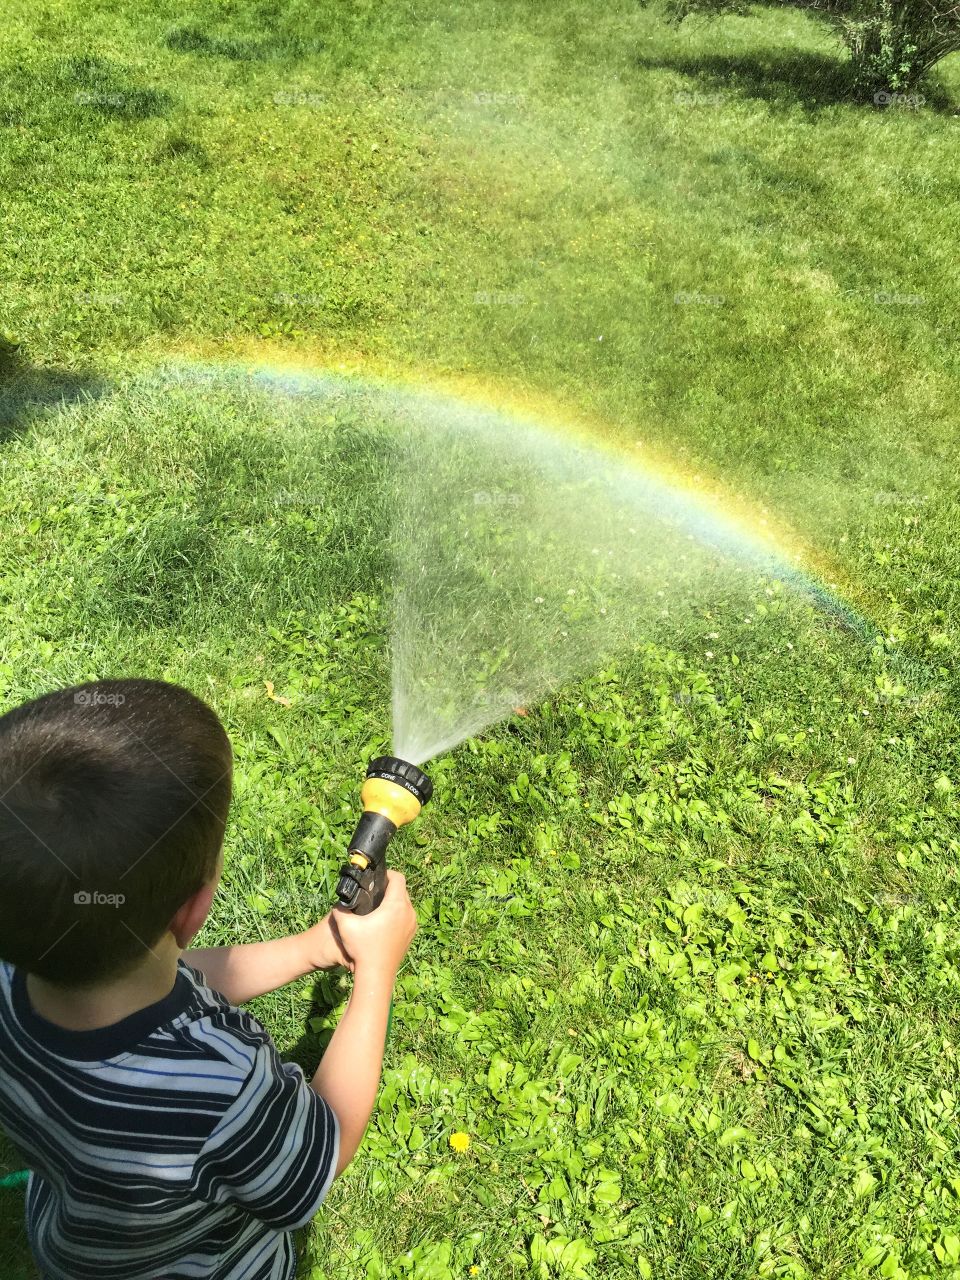 Making Rainbows with the Hose